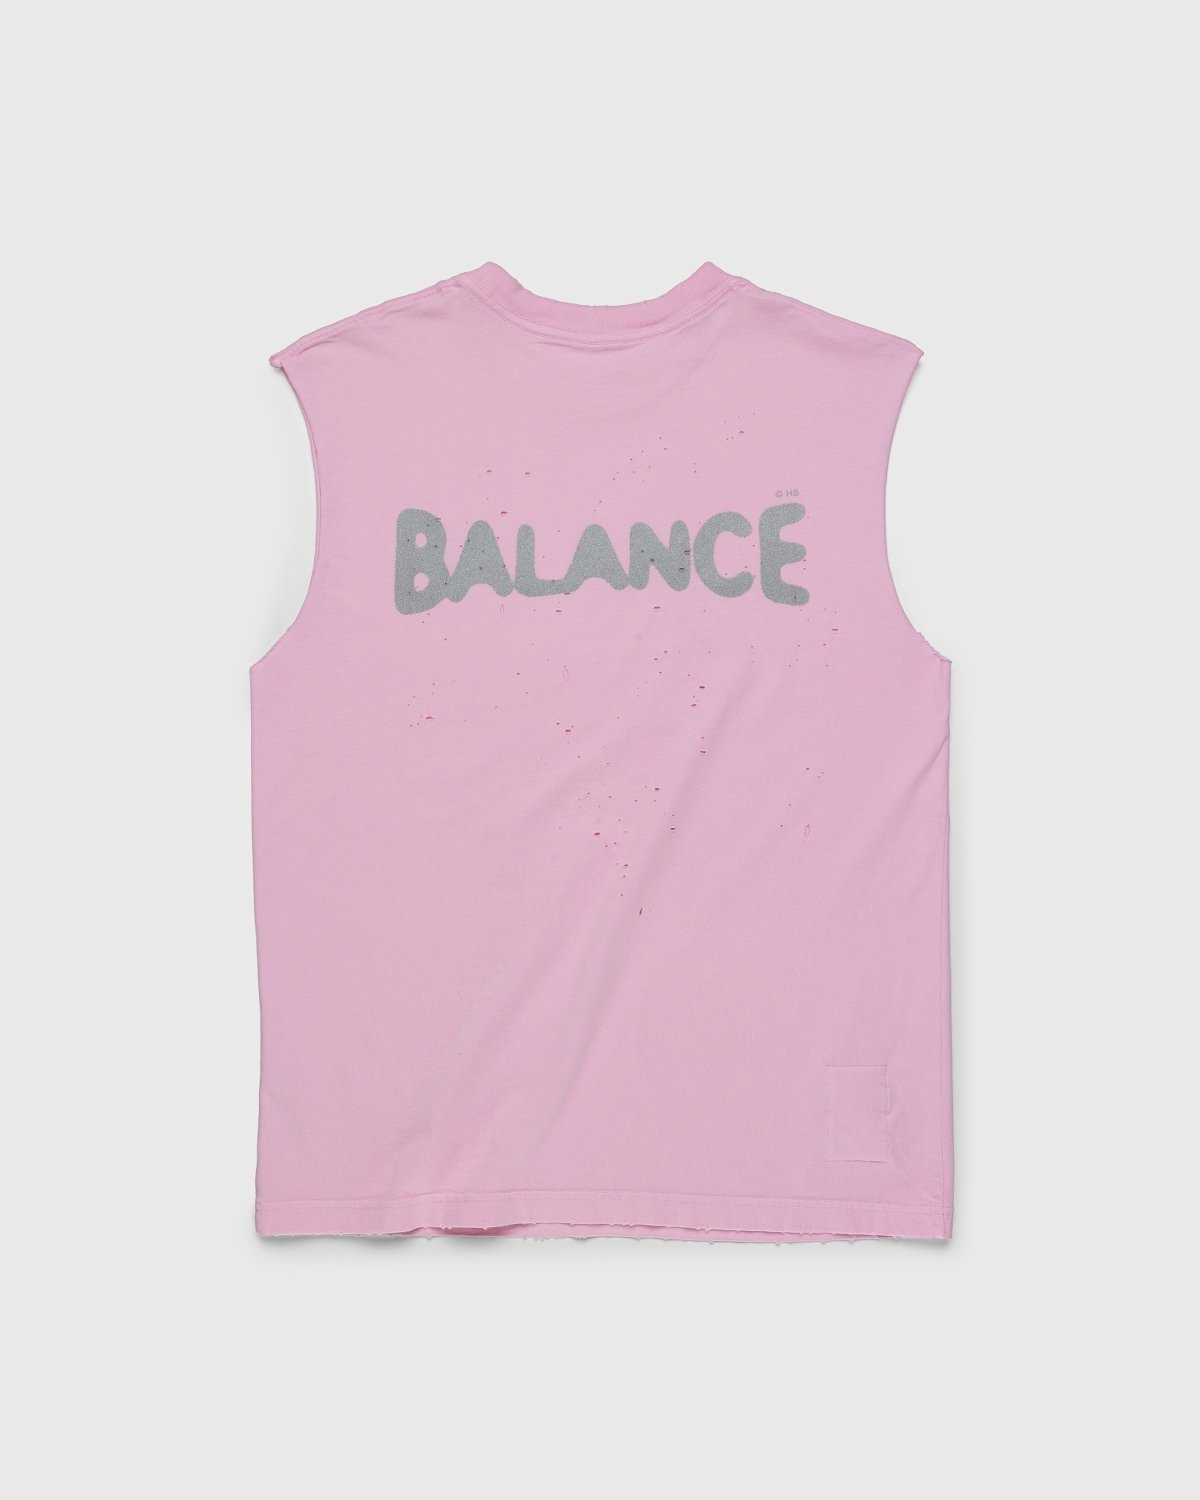 Satisfy x Highsnobiety – HS Sports Balance Muscle Tee Pink - Tops - Pink - Image 2